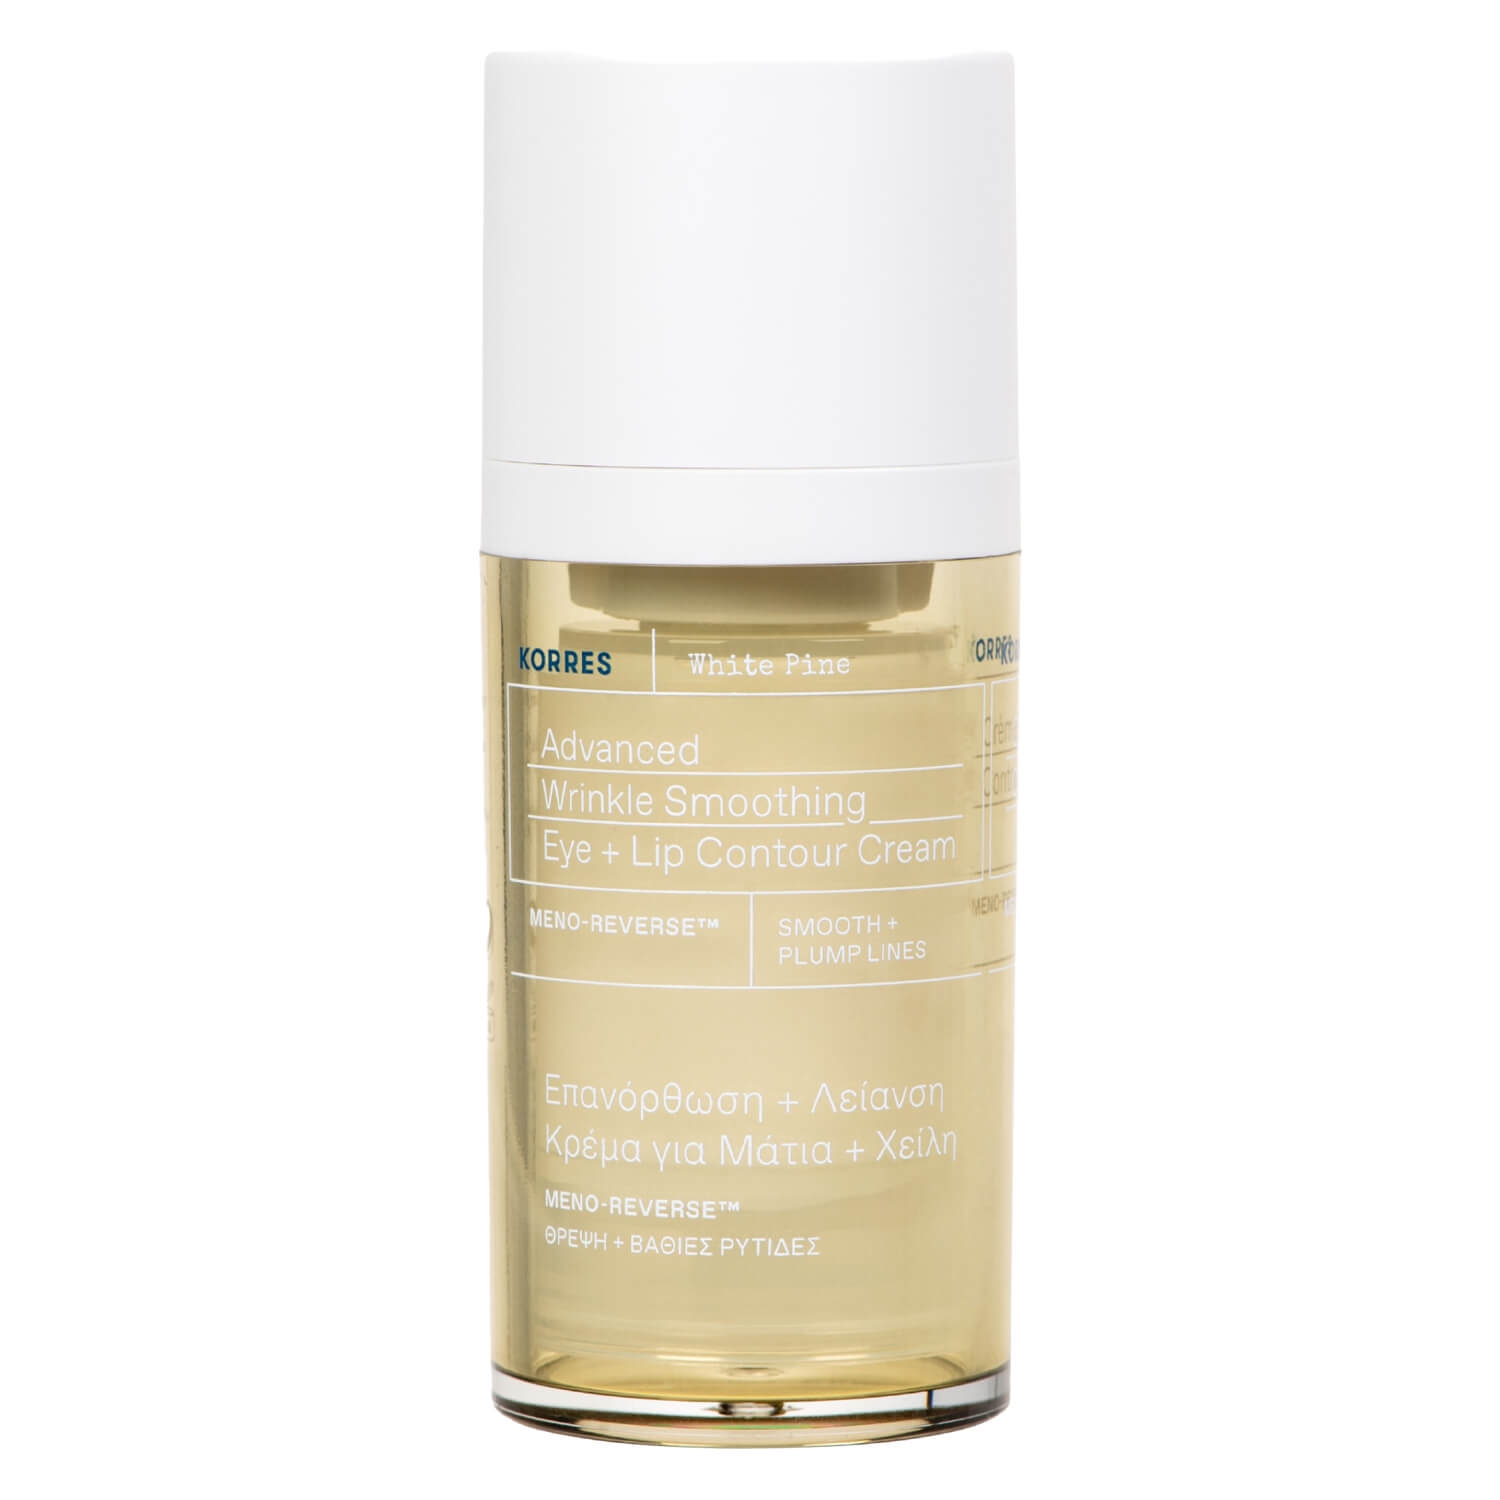 Product image from White Pine Advanced Wrinkle Smoothing Eye + Lip Contour Cream